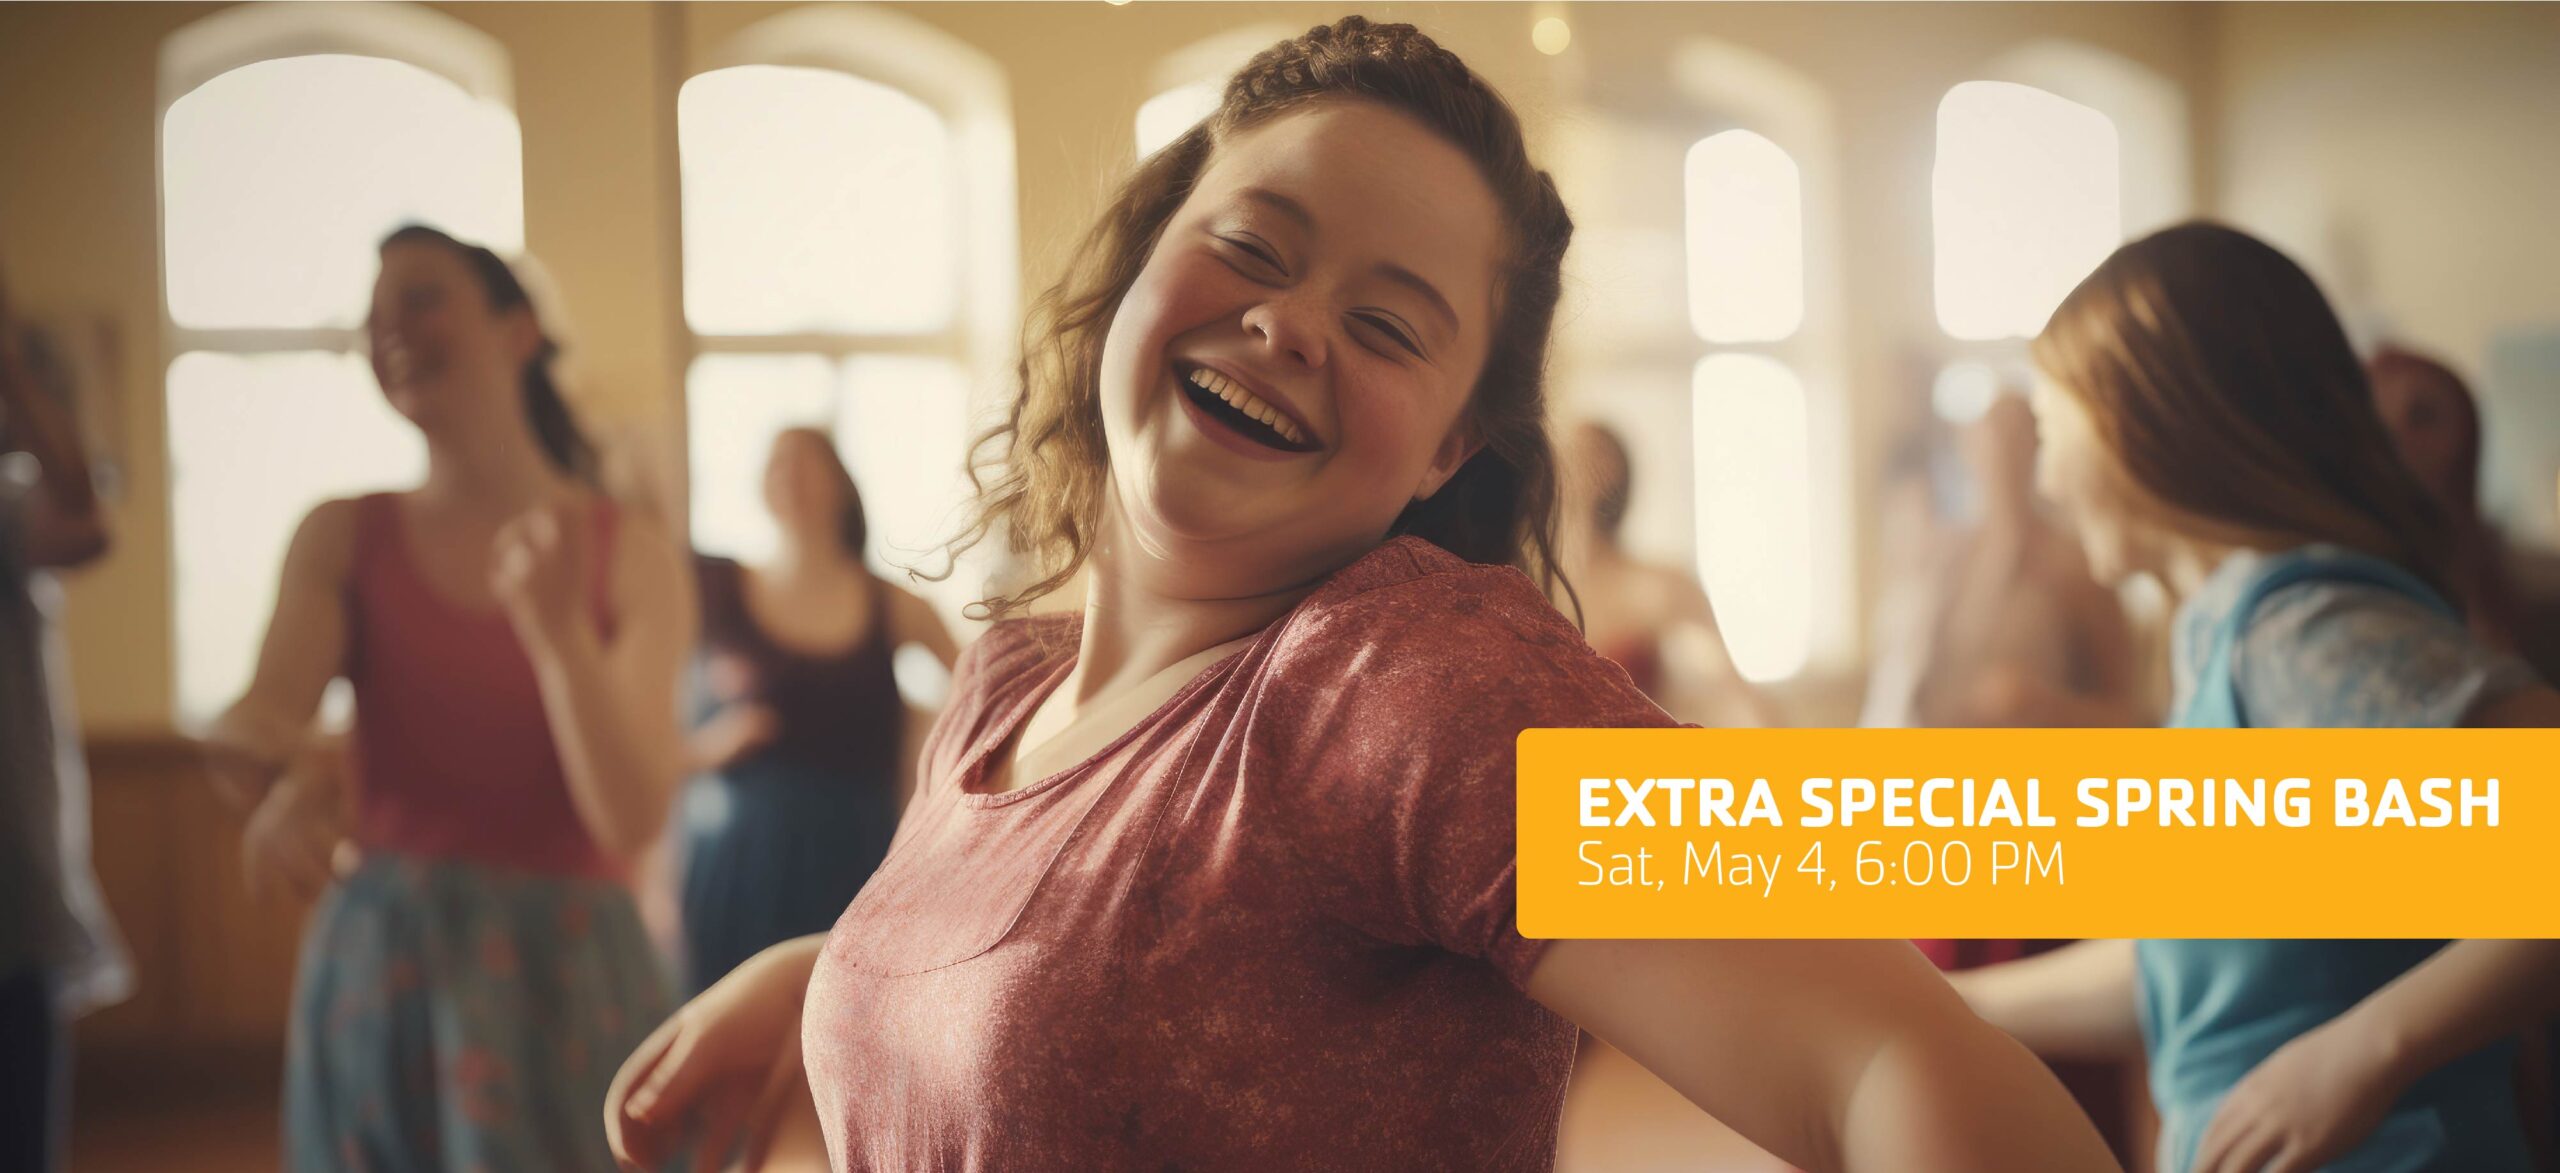 Extra special spring bash at the westport weston family ymca